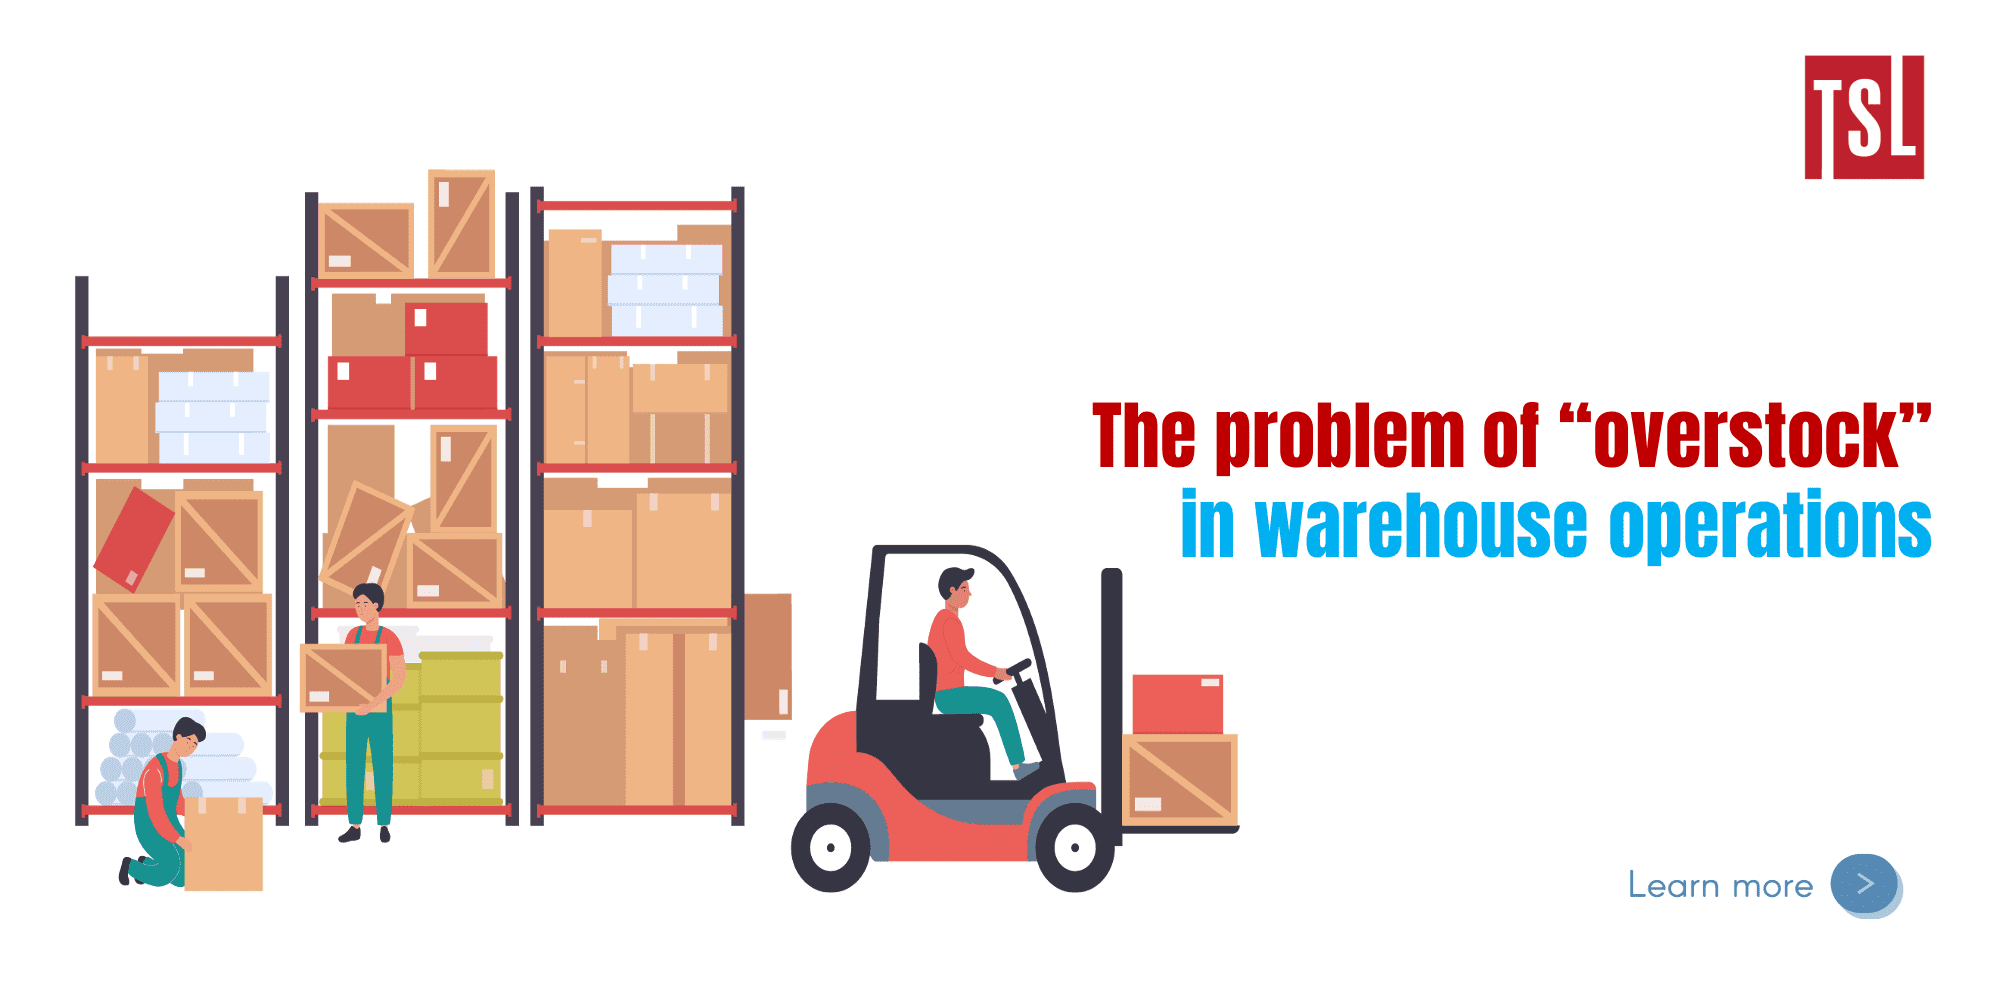 The problem of “overstock” in warehouse operations